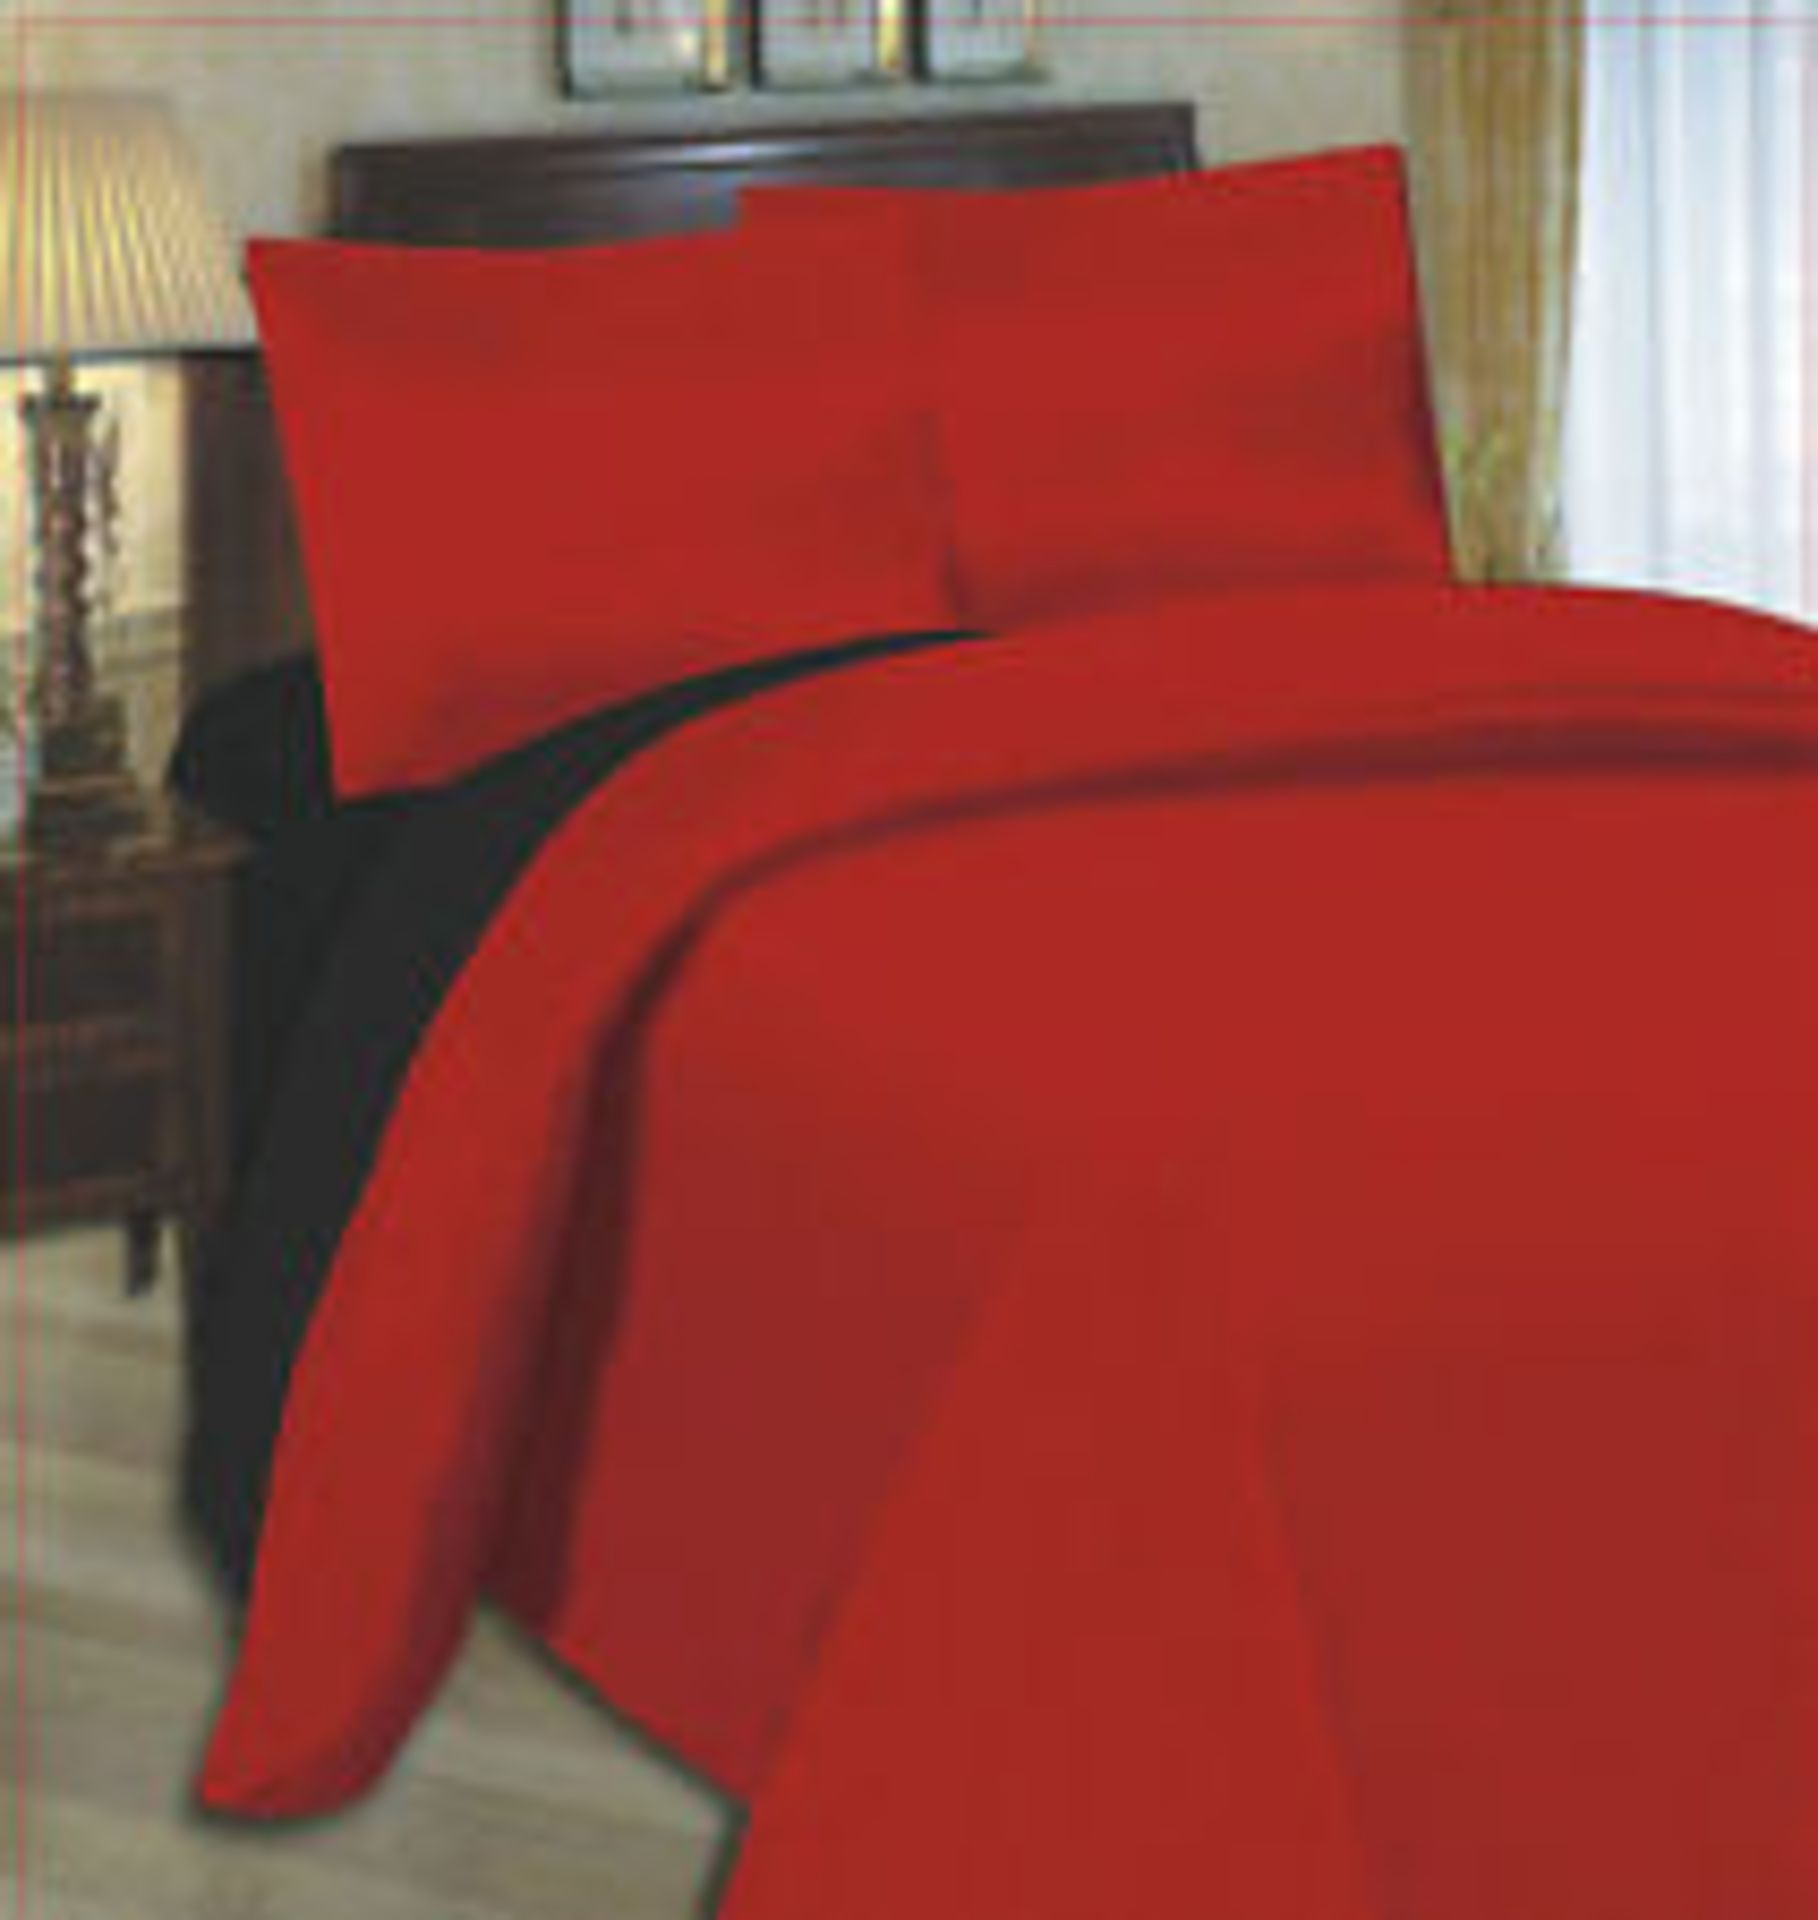 V *TRADE QTY* Brand New 4 Piece Reversible King Duvet Bed Set Includes - 1 Duvet Cover - 1 Fitted